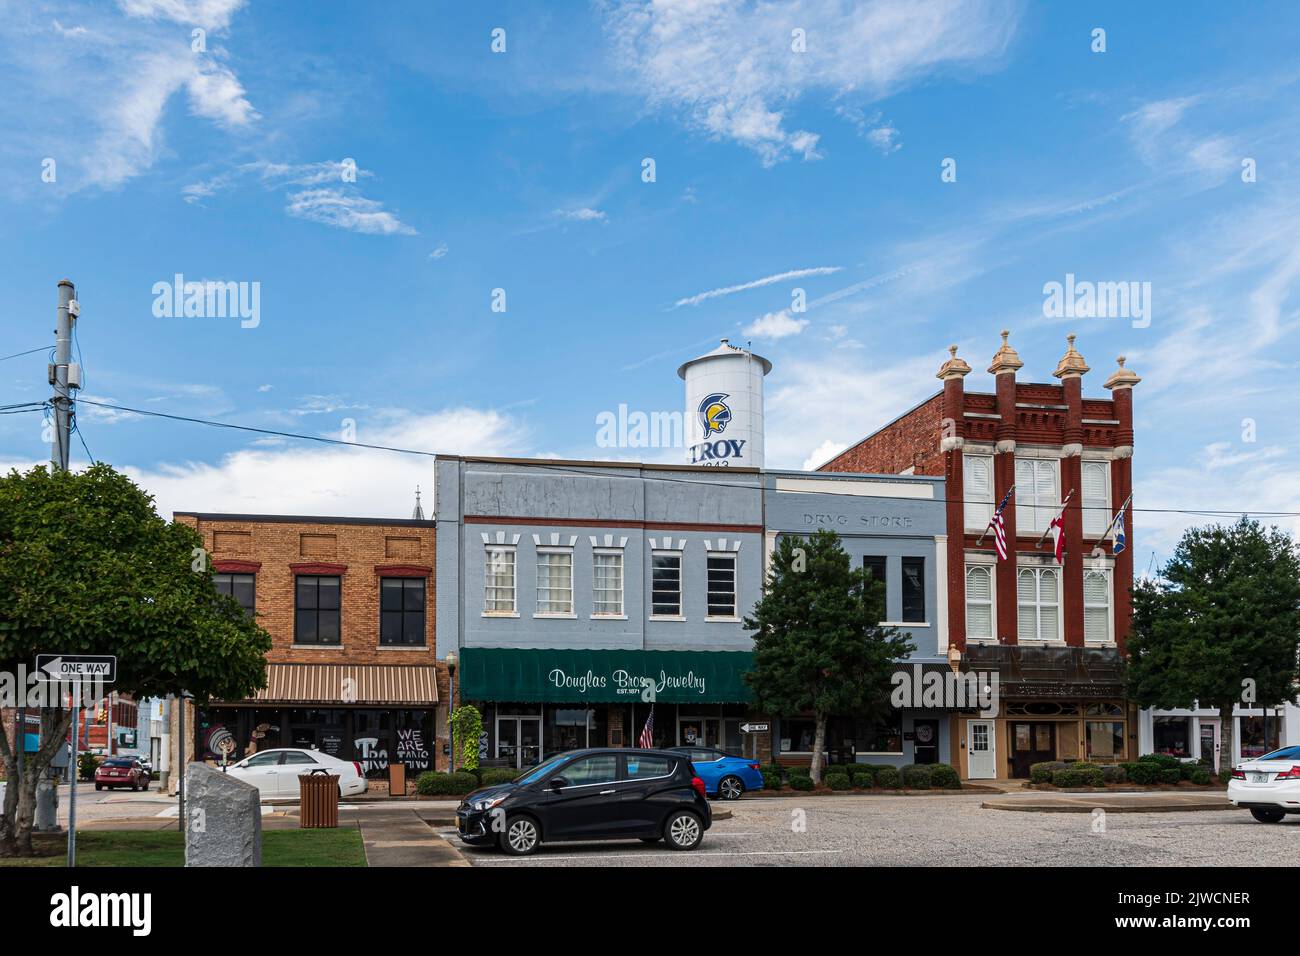 Troy, Alabama, USA - Sept. 3, 2022: View of small businesses surrounding the town square in historic downtown Troy, Alabama. Stock Photo